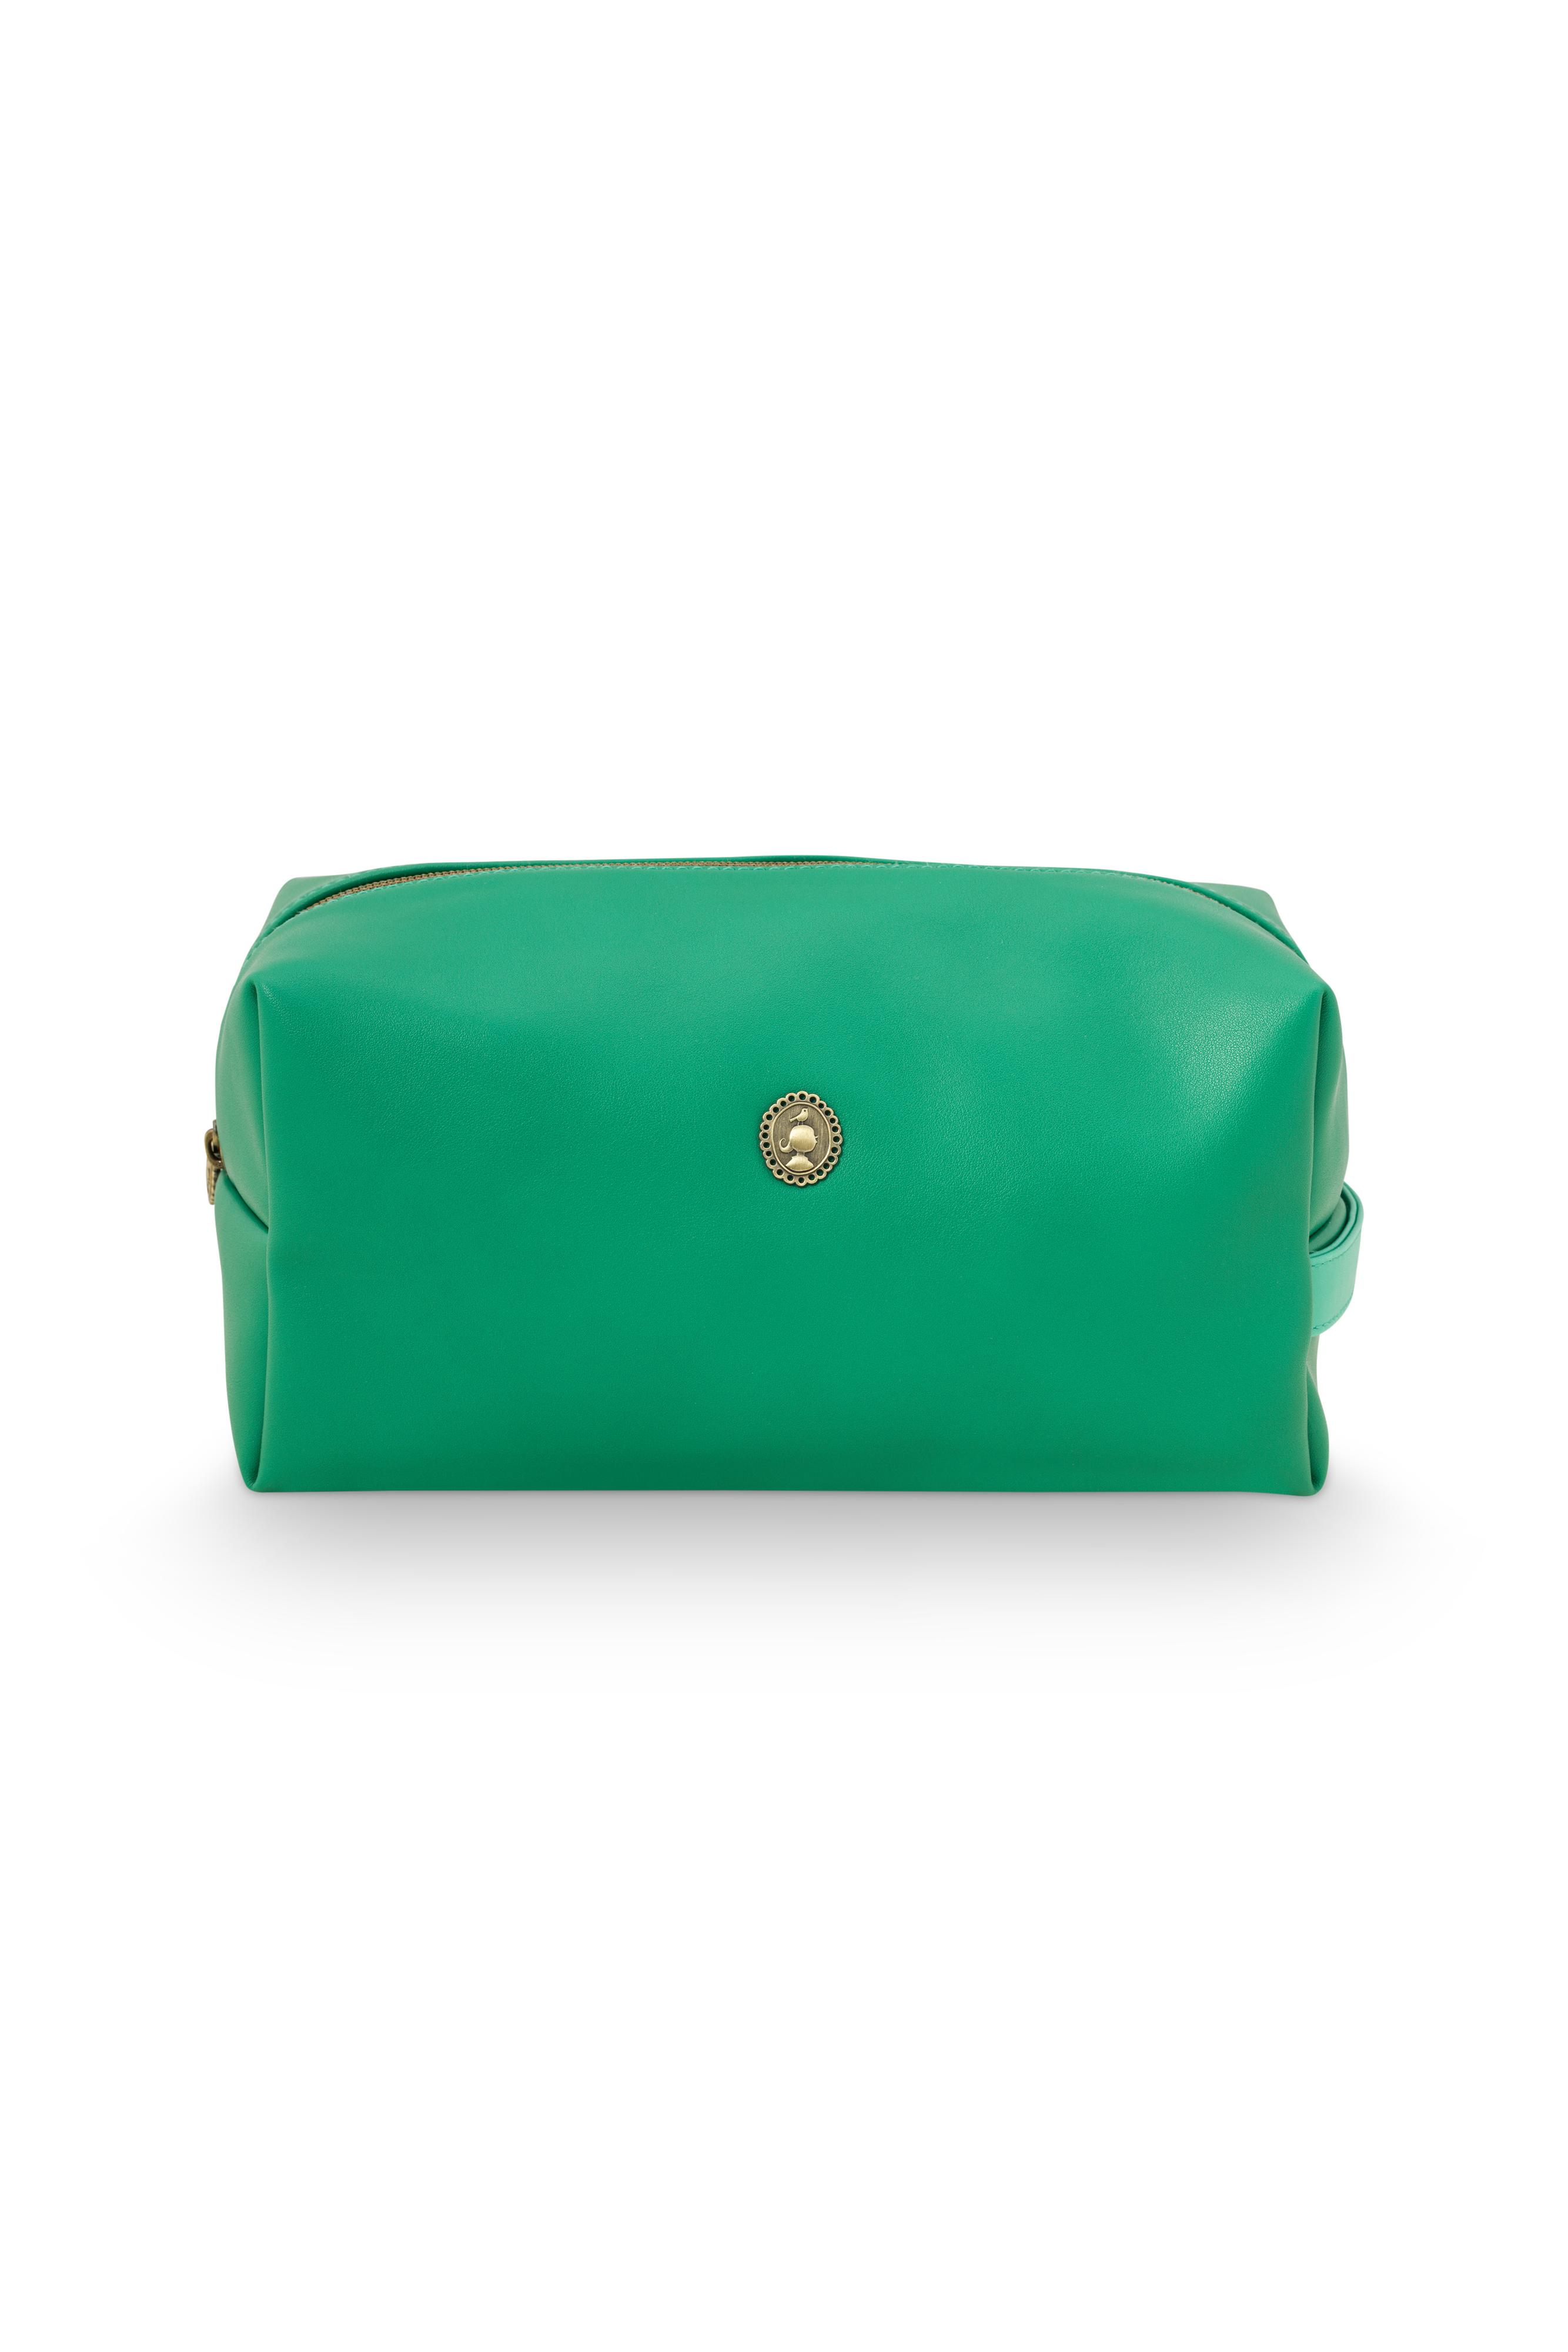 Coco Cosmetic Bag Med Green 21.5x10x10.5cm Gift